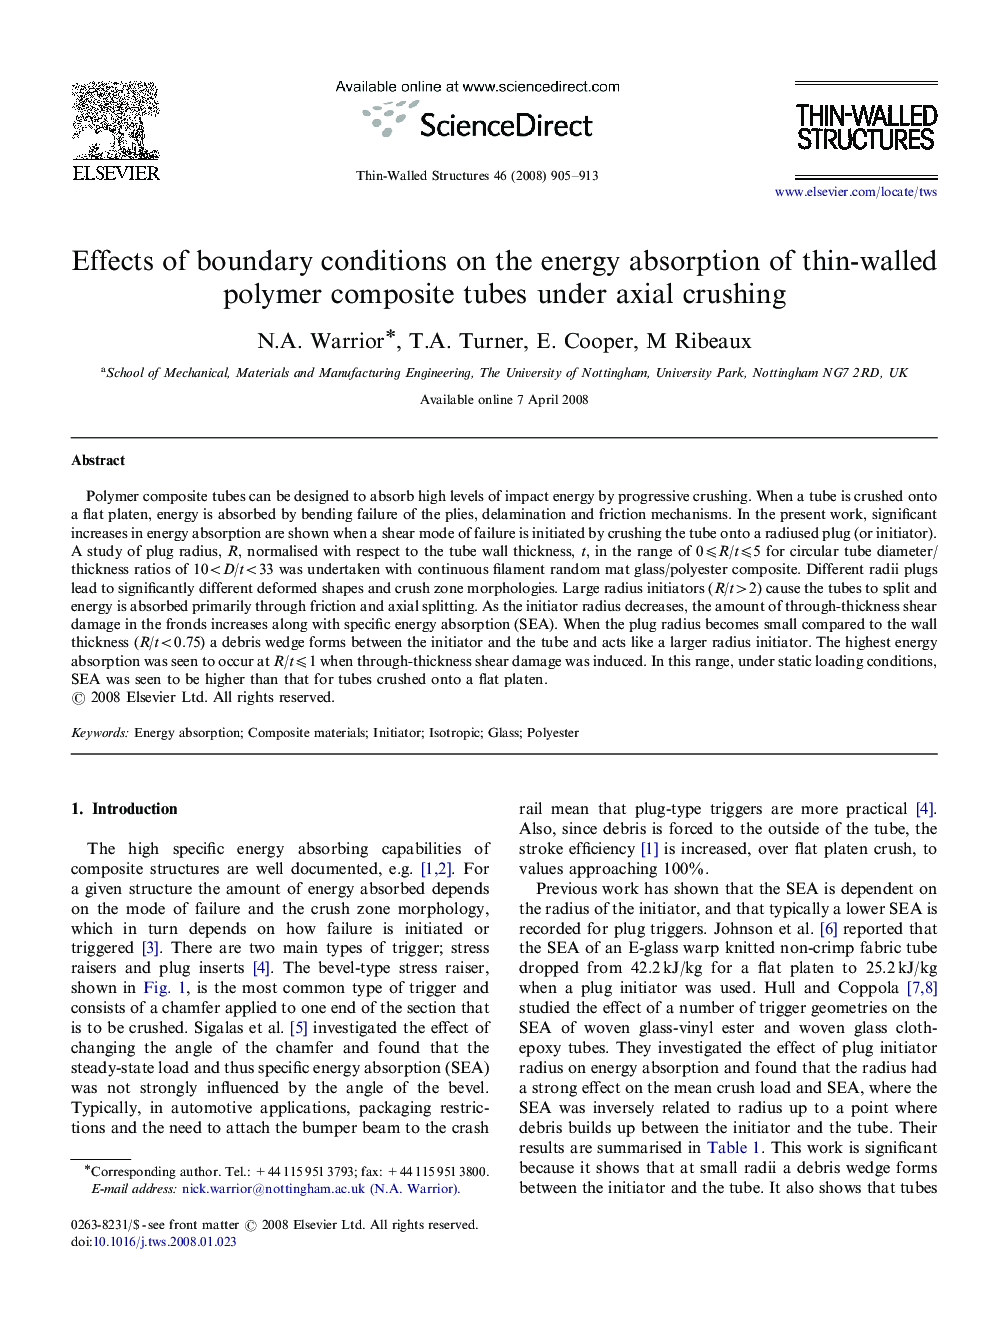 Effects of boundary conditions on the energy absorption of thin-walled polymer composite tubes under axial crushing